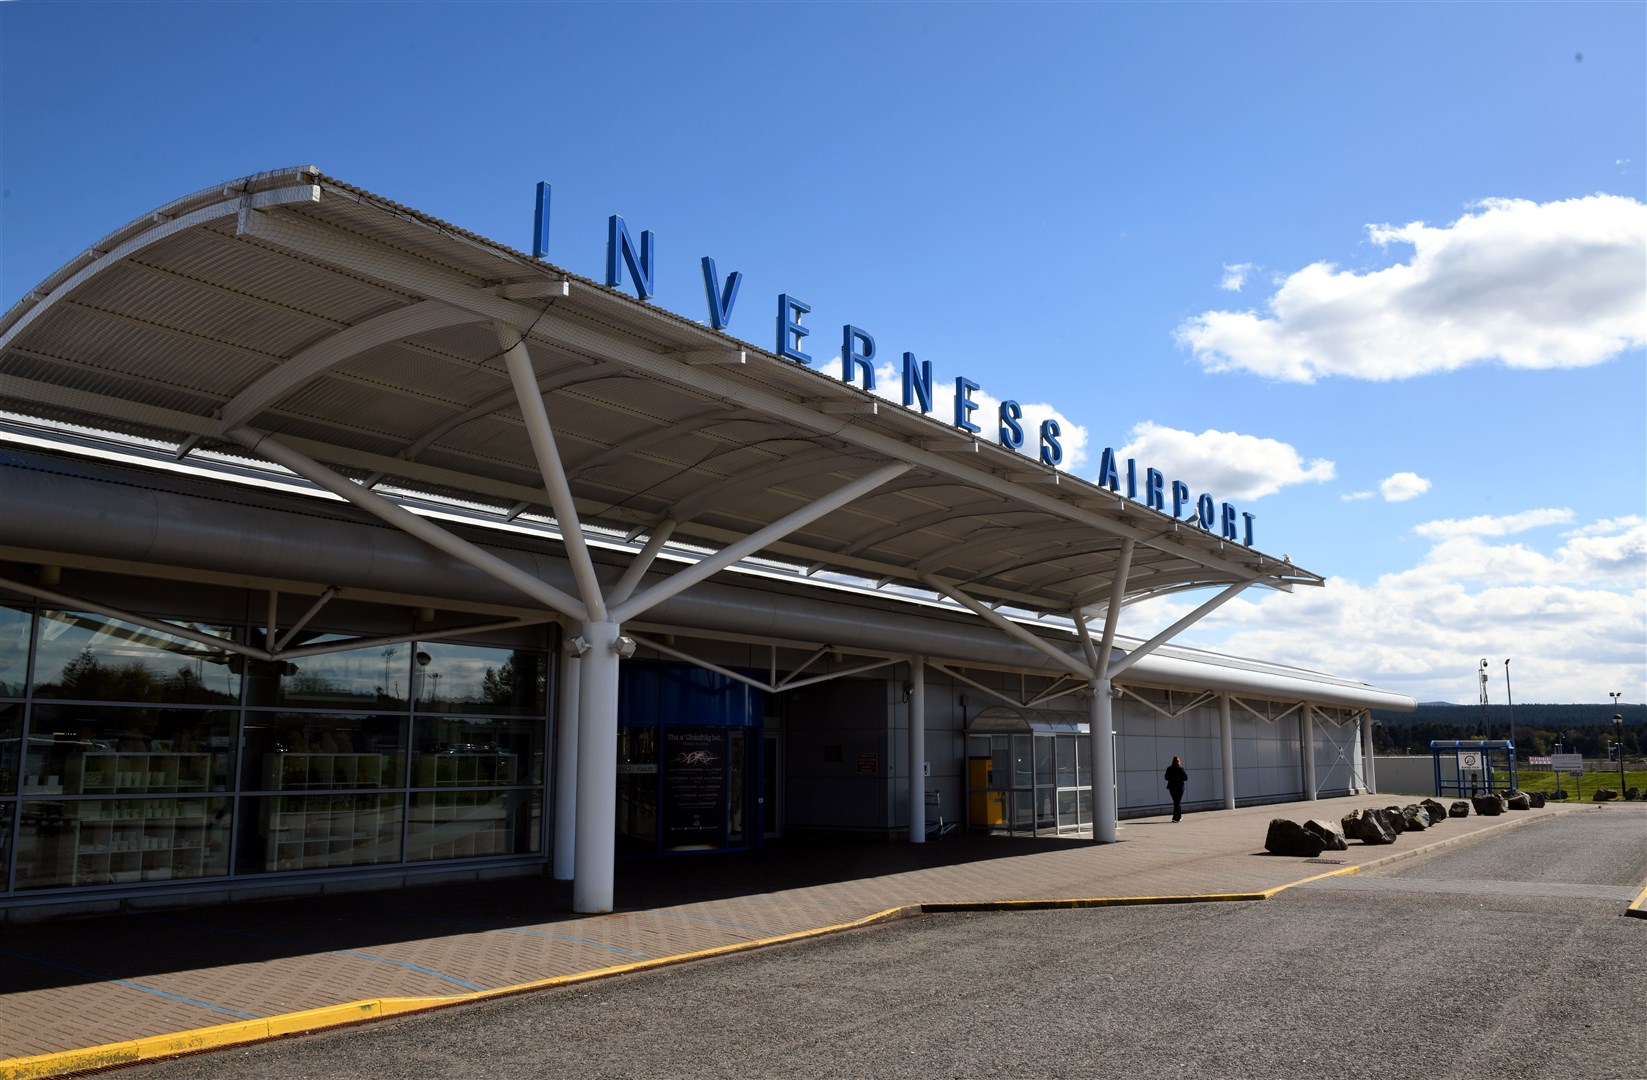 Inverness Airport remained open overnight to accommodate 30 passengers.